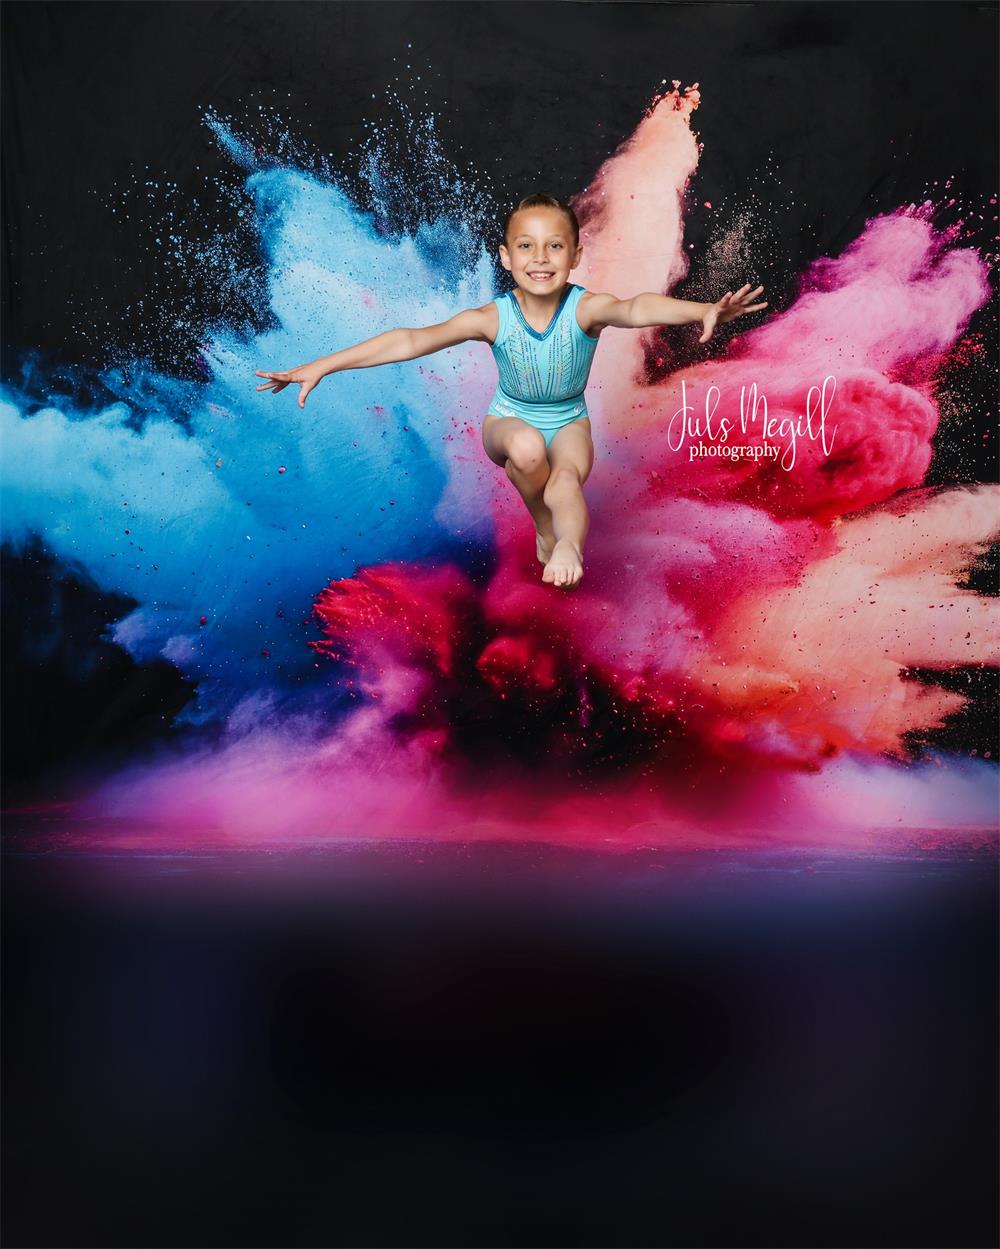 Kate Sweep Cool Colorful Burst of Powder Black Wall Backdrop Designed by Lidia Redekopp